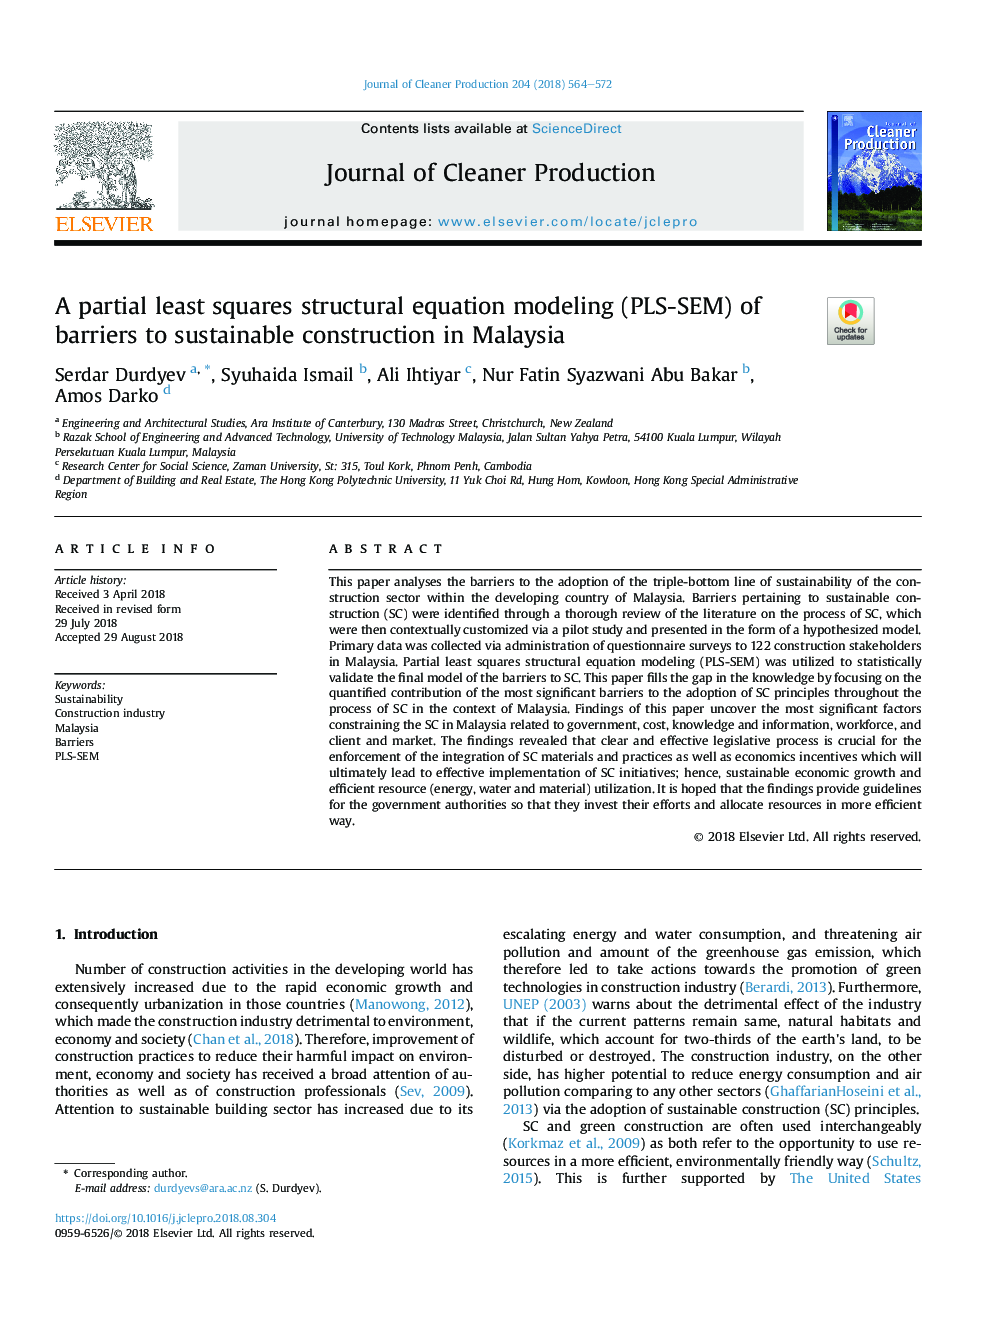 A partial least squares structural equation modeling (PLS-SEM) of barriers to sustainable construction in Malaysia